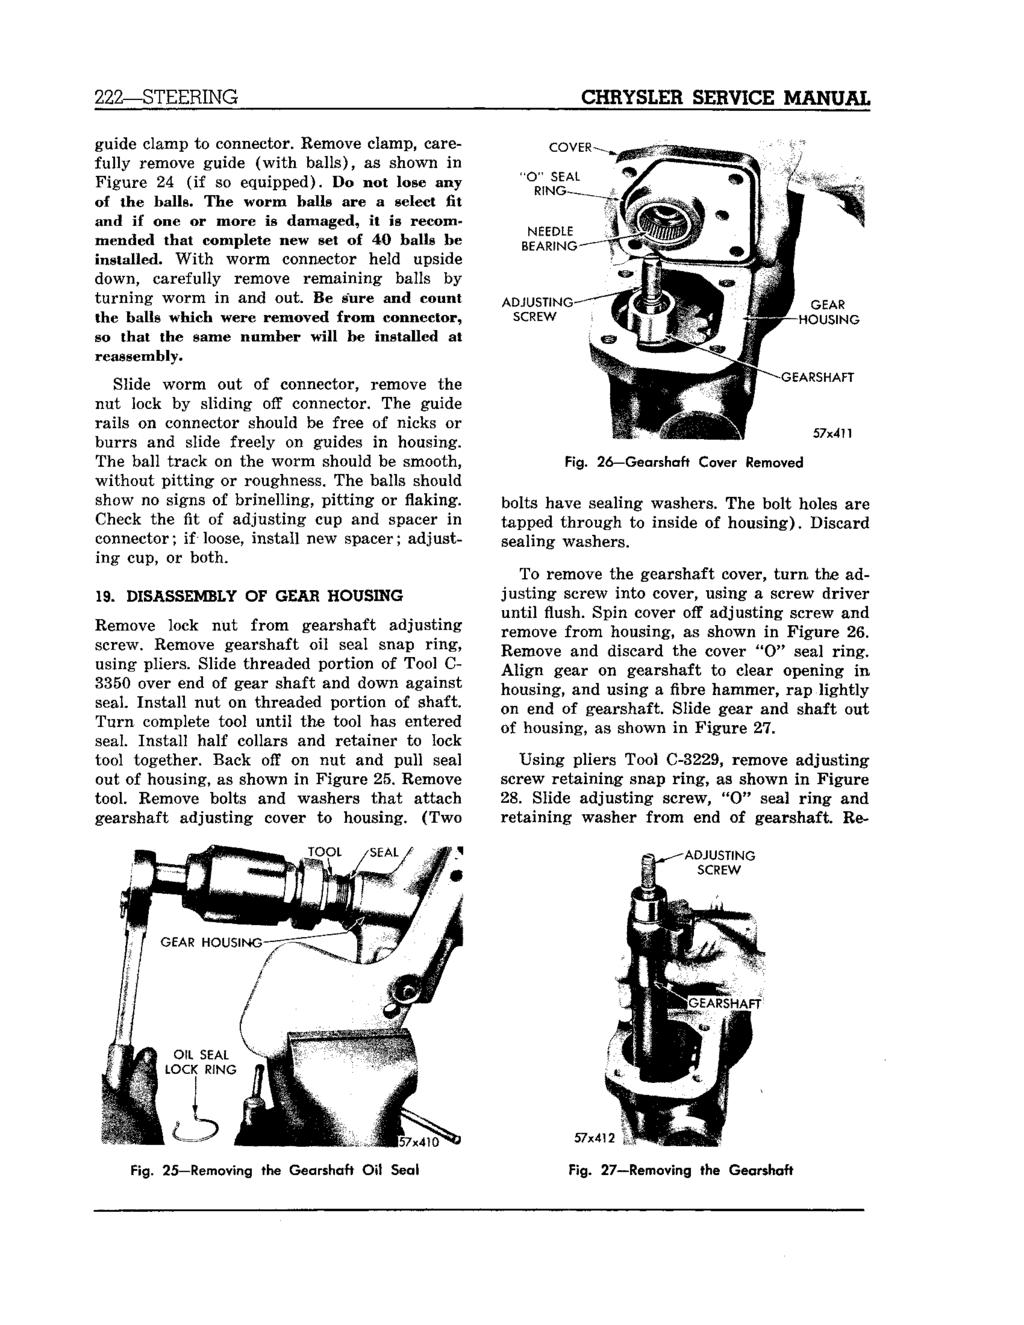 222 STEERING CHRYSLER SERVICE MANUAL guide clamp to connector. Remove clamp, carefully remove guide (with balls), as shown in Figure 24 (if so equipped). Do not lose any of the balls.